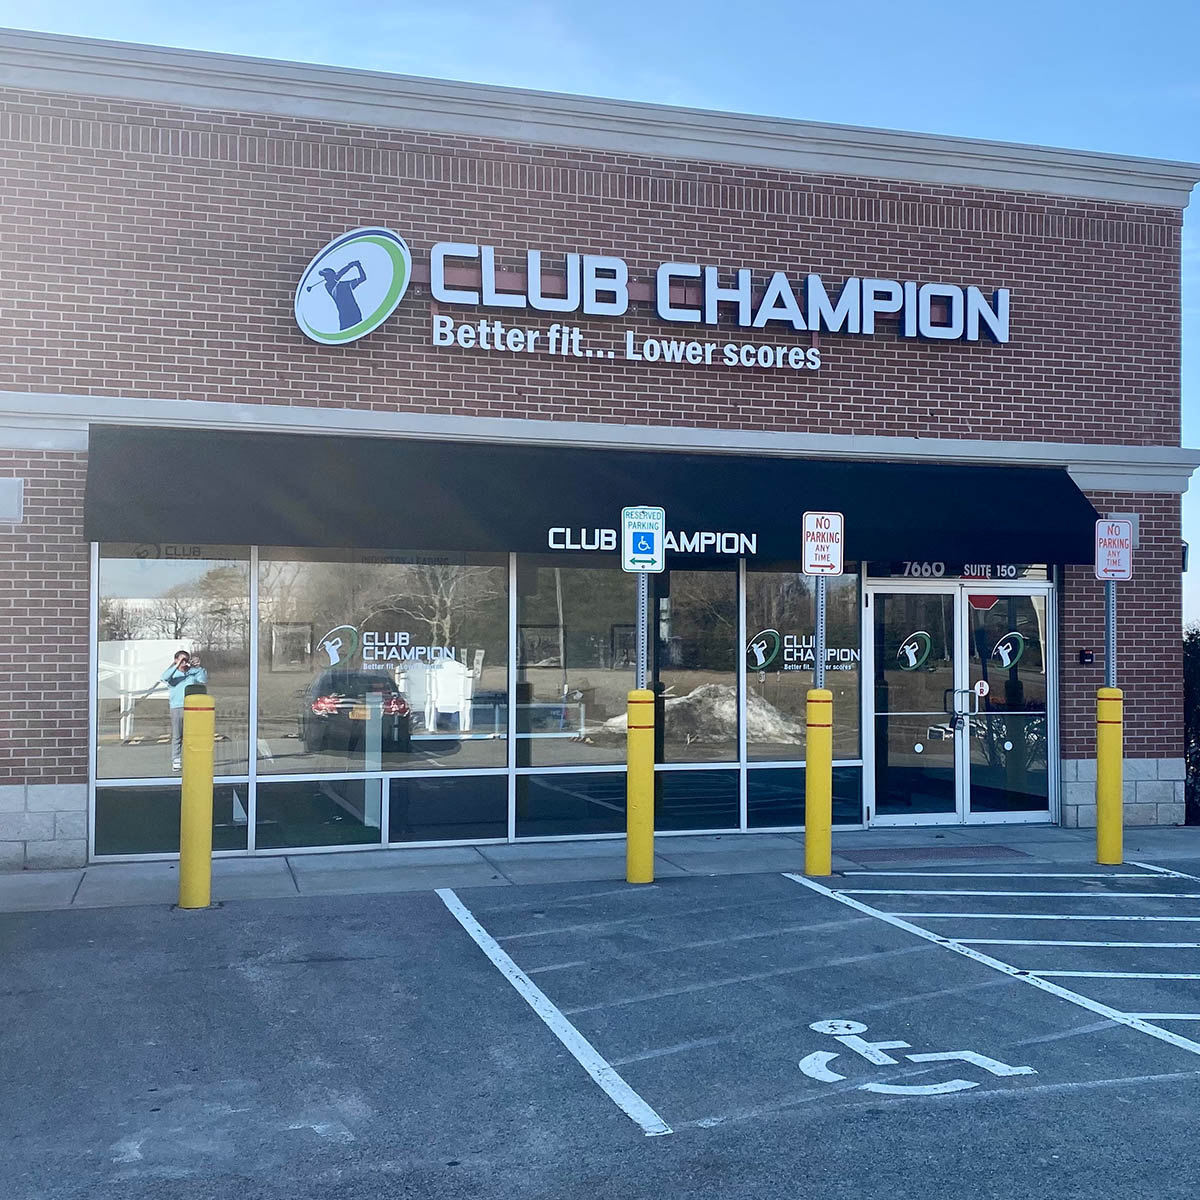 A new team store fit for Champions! 🏆 Effective today, the Center